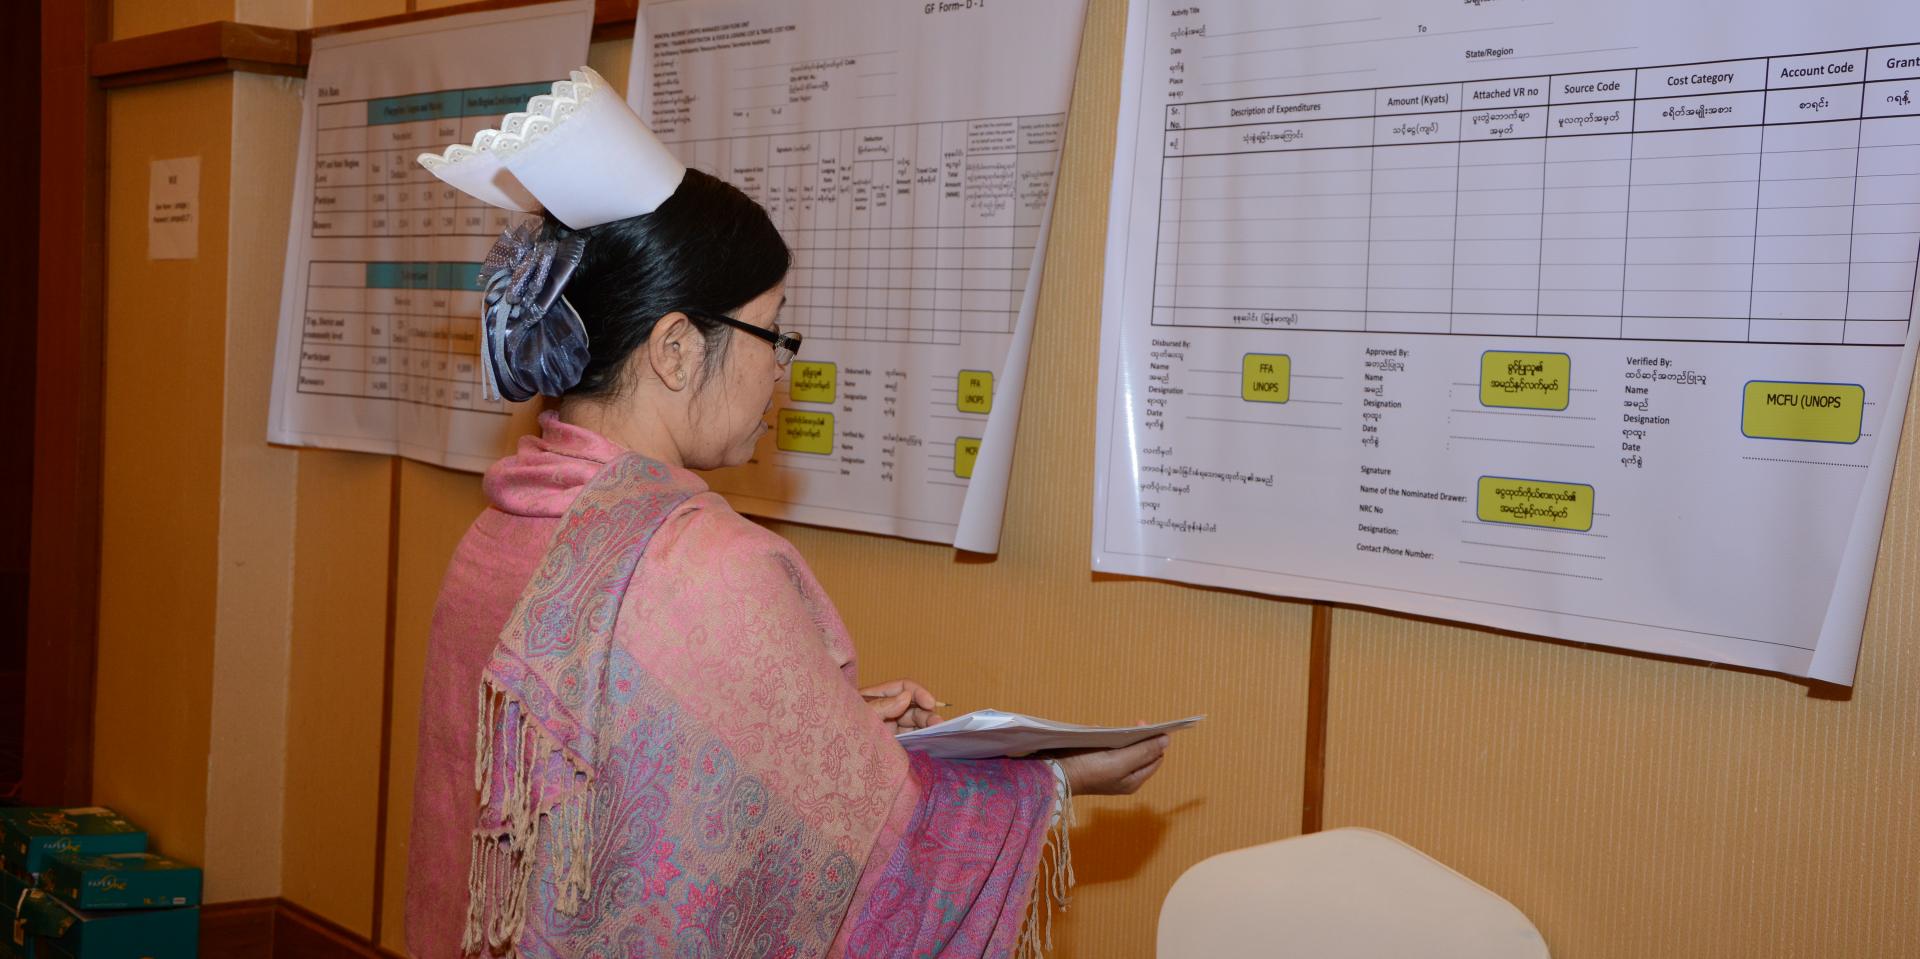 During the group-work practice of the financial management training, Managed Cash Flow forms and formats were displayed in the training room. This helped familiarize health staff participants with the forms and their use. A Township Health Nurse (THN) carefully reads the forms and formats and takes notes. Nay Pyi Taw, 2017.